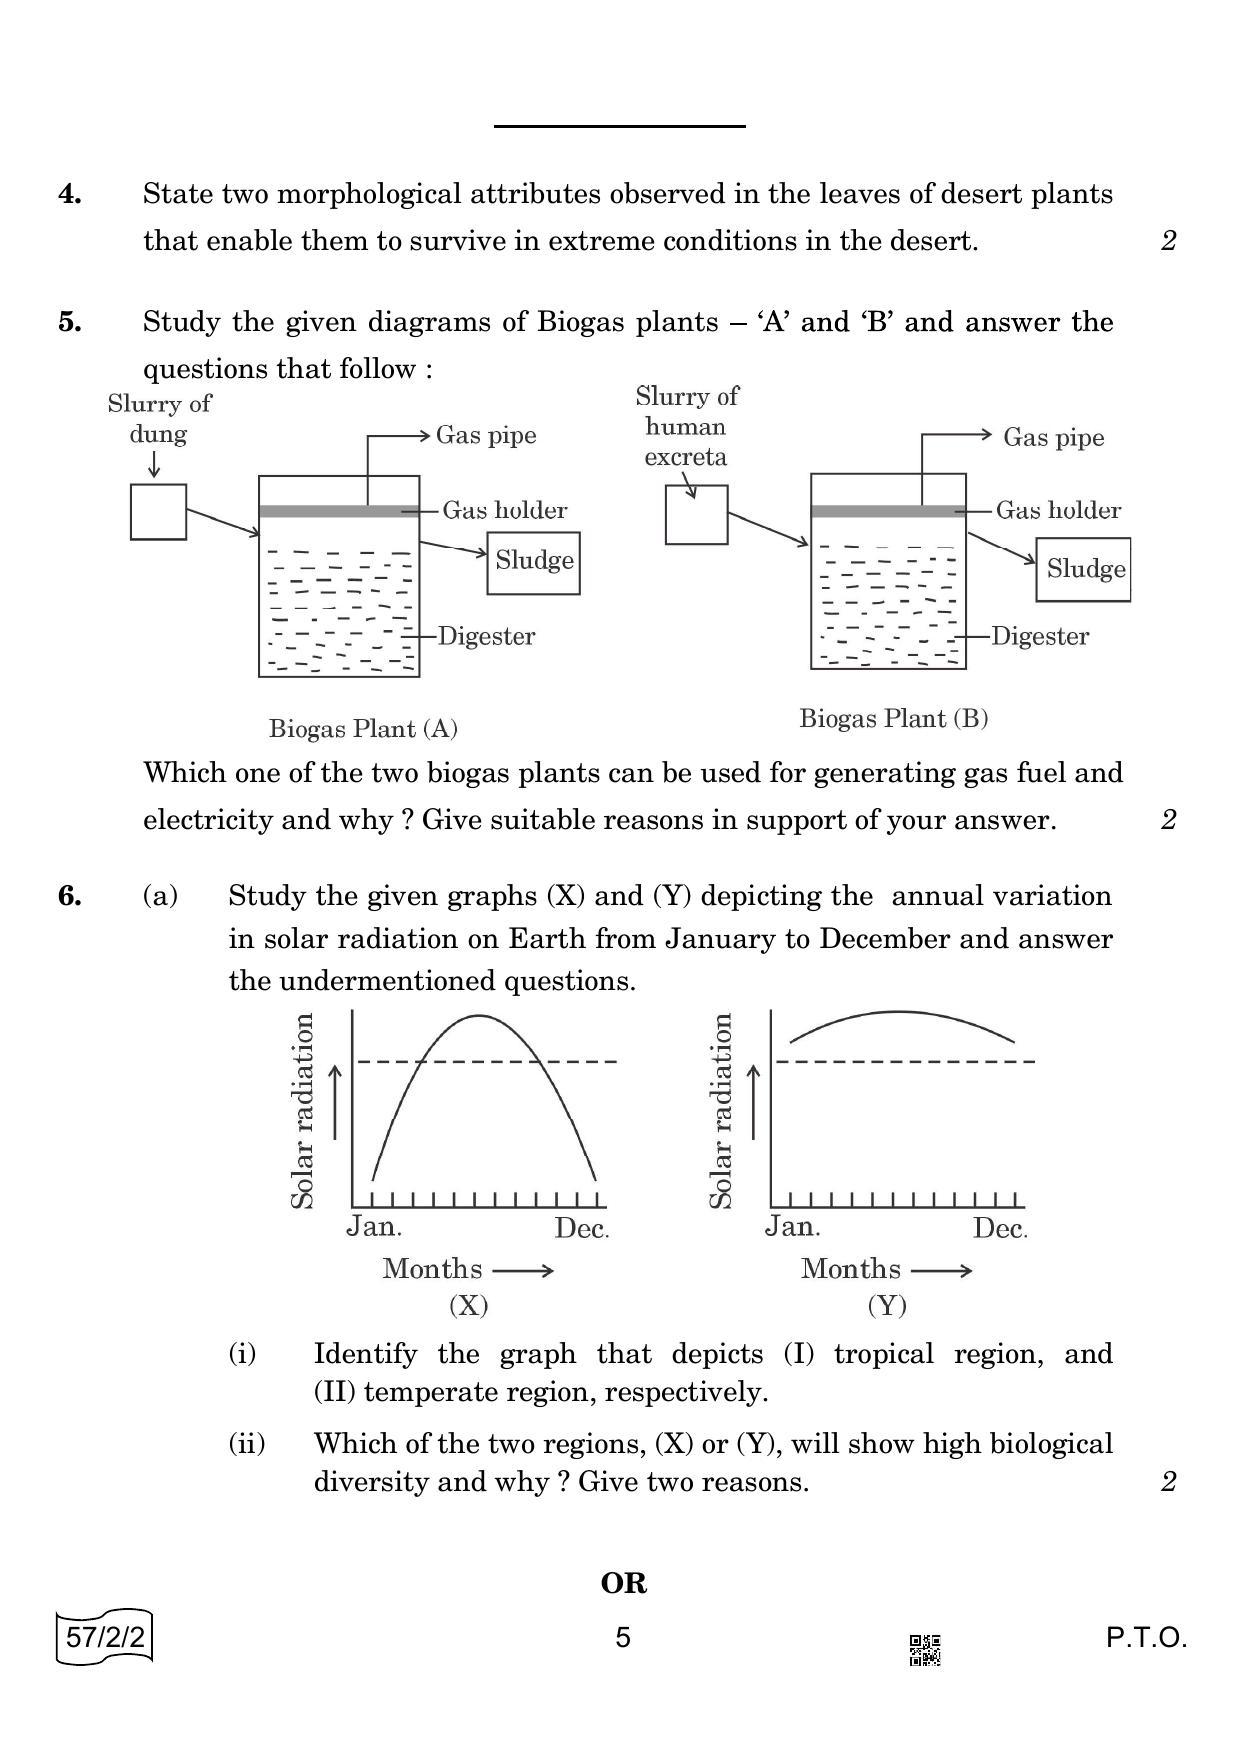 CBSE Class 12 57-2-2 Biology 2022 Question Paper - Page 5